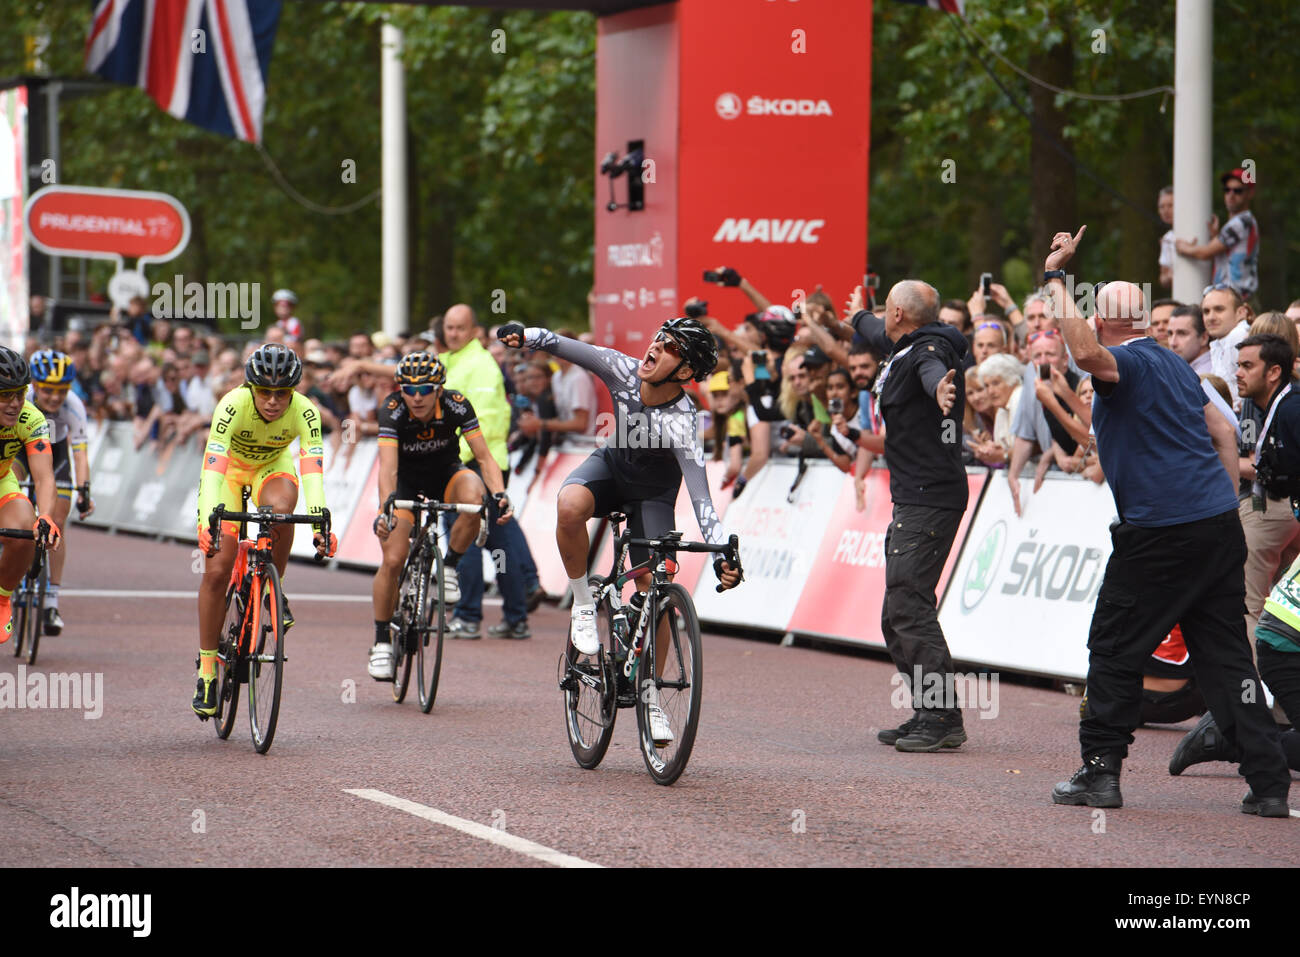 London, UK. 1st August, 2015. Barbara Guarischi (Velocio Sports) wins the Prudential RideLondon Grand Prix at The Mall, London, United Kingdom on 1 August 2015. The race, which started at Horse Guards Parade and finished on The Mall, featured many of the world's top female professional cyclists and was won by Barbara Guarischi (Velocio Sports) Credit:  Andrew Peat/Alamy Live News Stock Photo